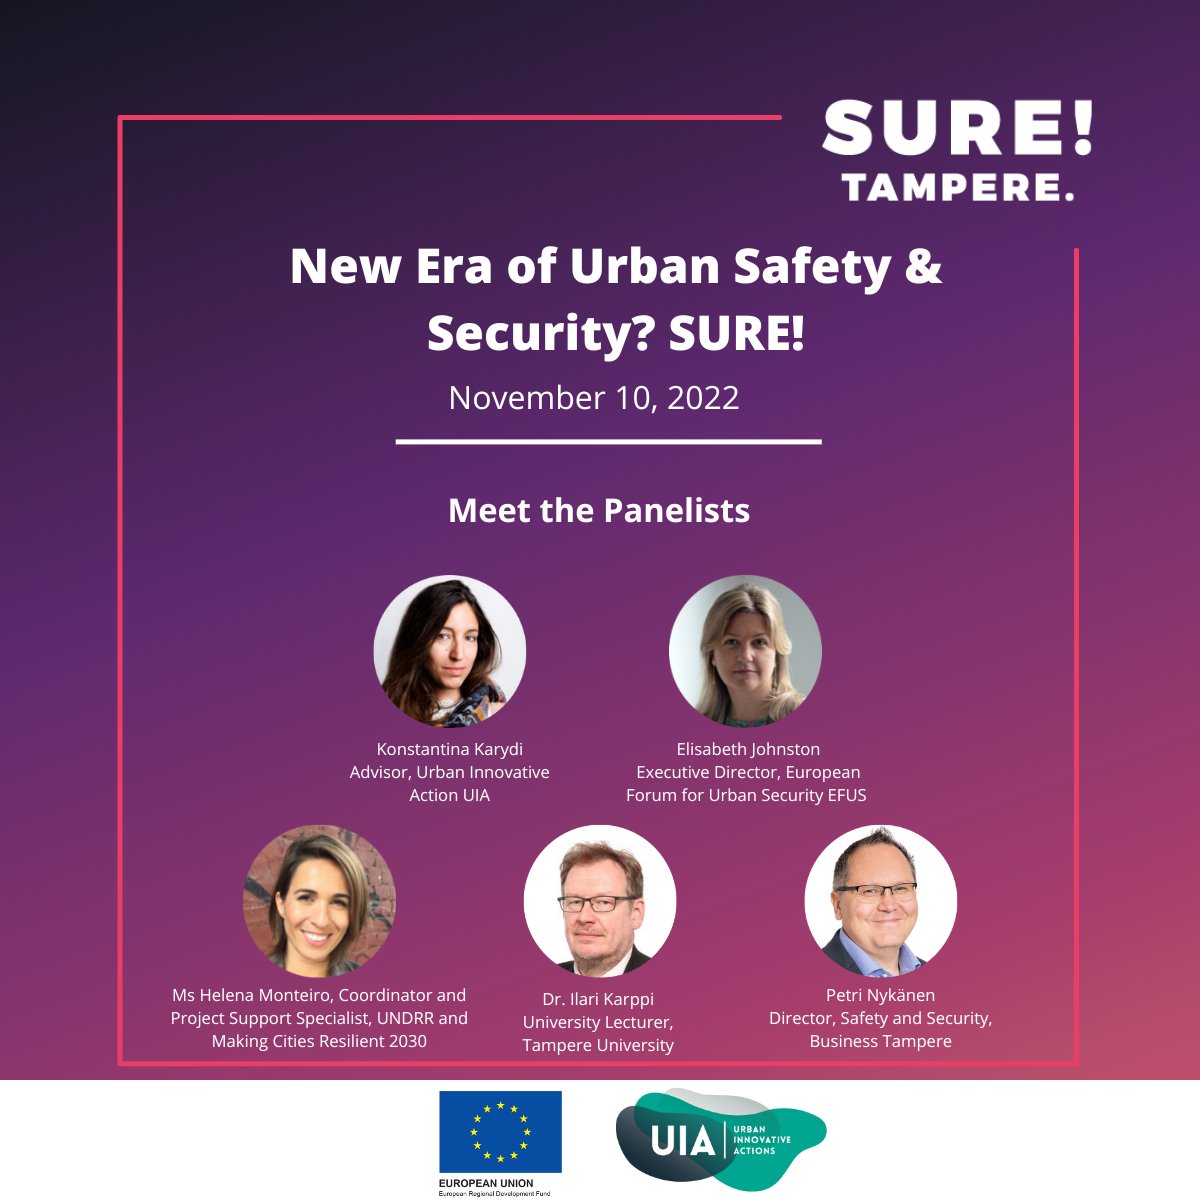 You can still register for tomorrow's #SURETampere UIA #urbansecurity event!
Join us and learn about
👉 ​Good practices to increase urban resilience
👉​ Blending technology and trust between security stakeholders and the public.
Register here: tinyurl.com/2pvr5uxj